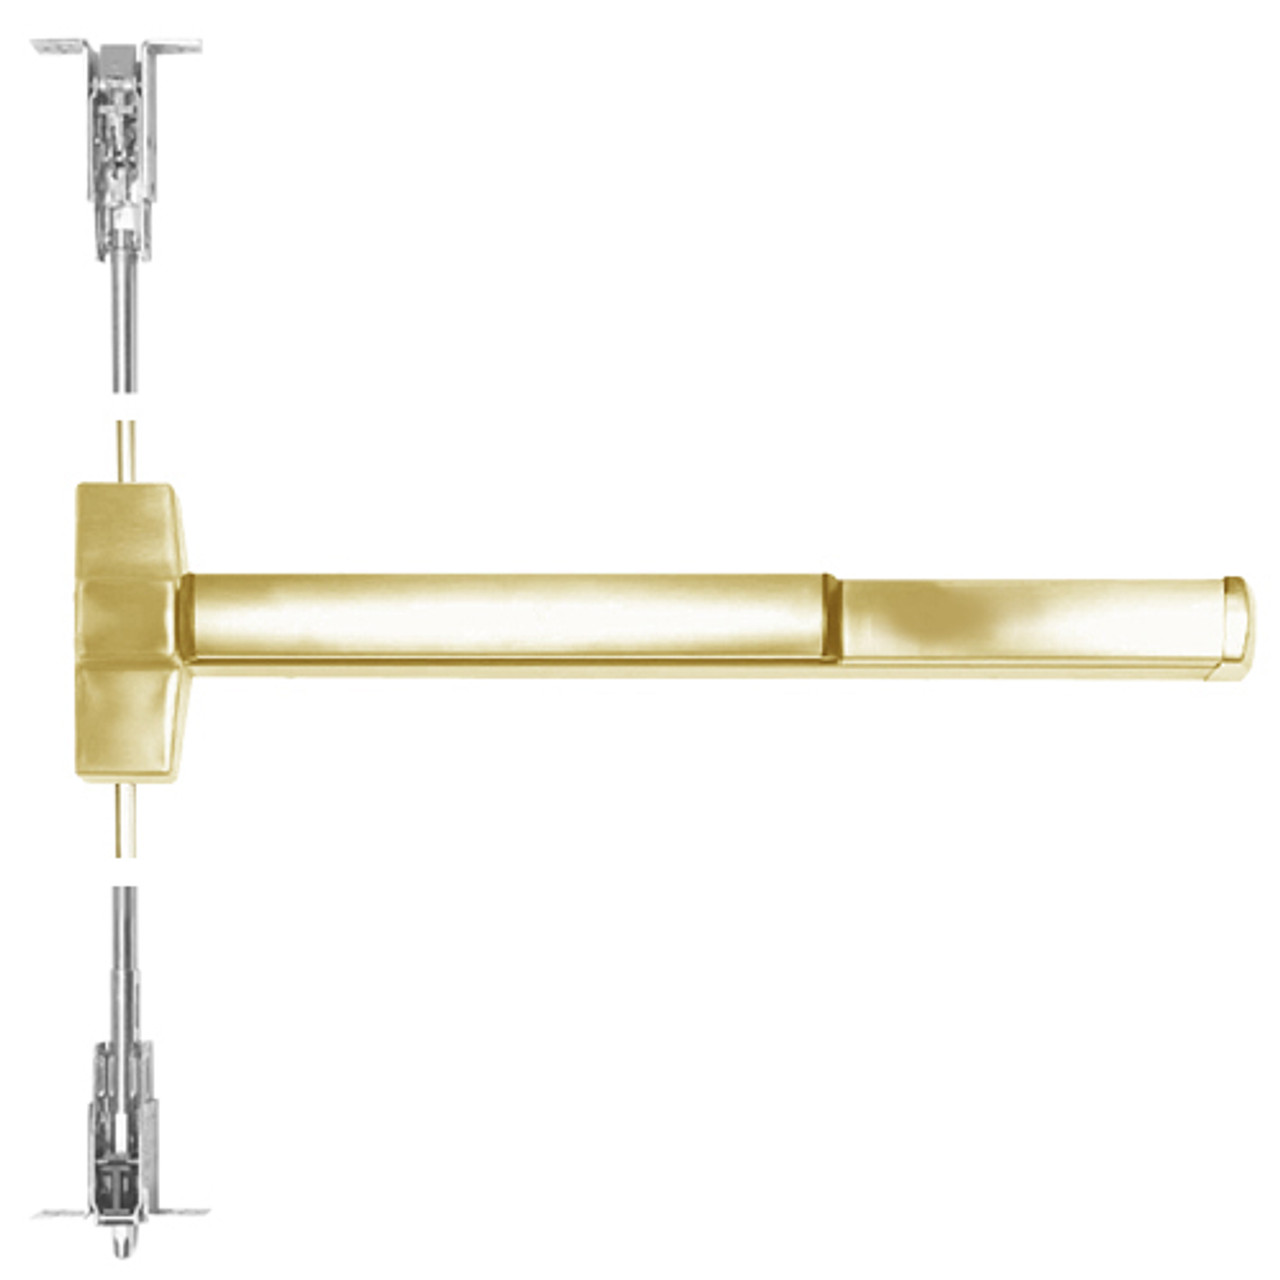 ED5800A-606-W048-M61 Corbin ED5800 Series Fire Rated Concealed Vertical Rod Device with Exit Alarm Device in Satin Brass Finish